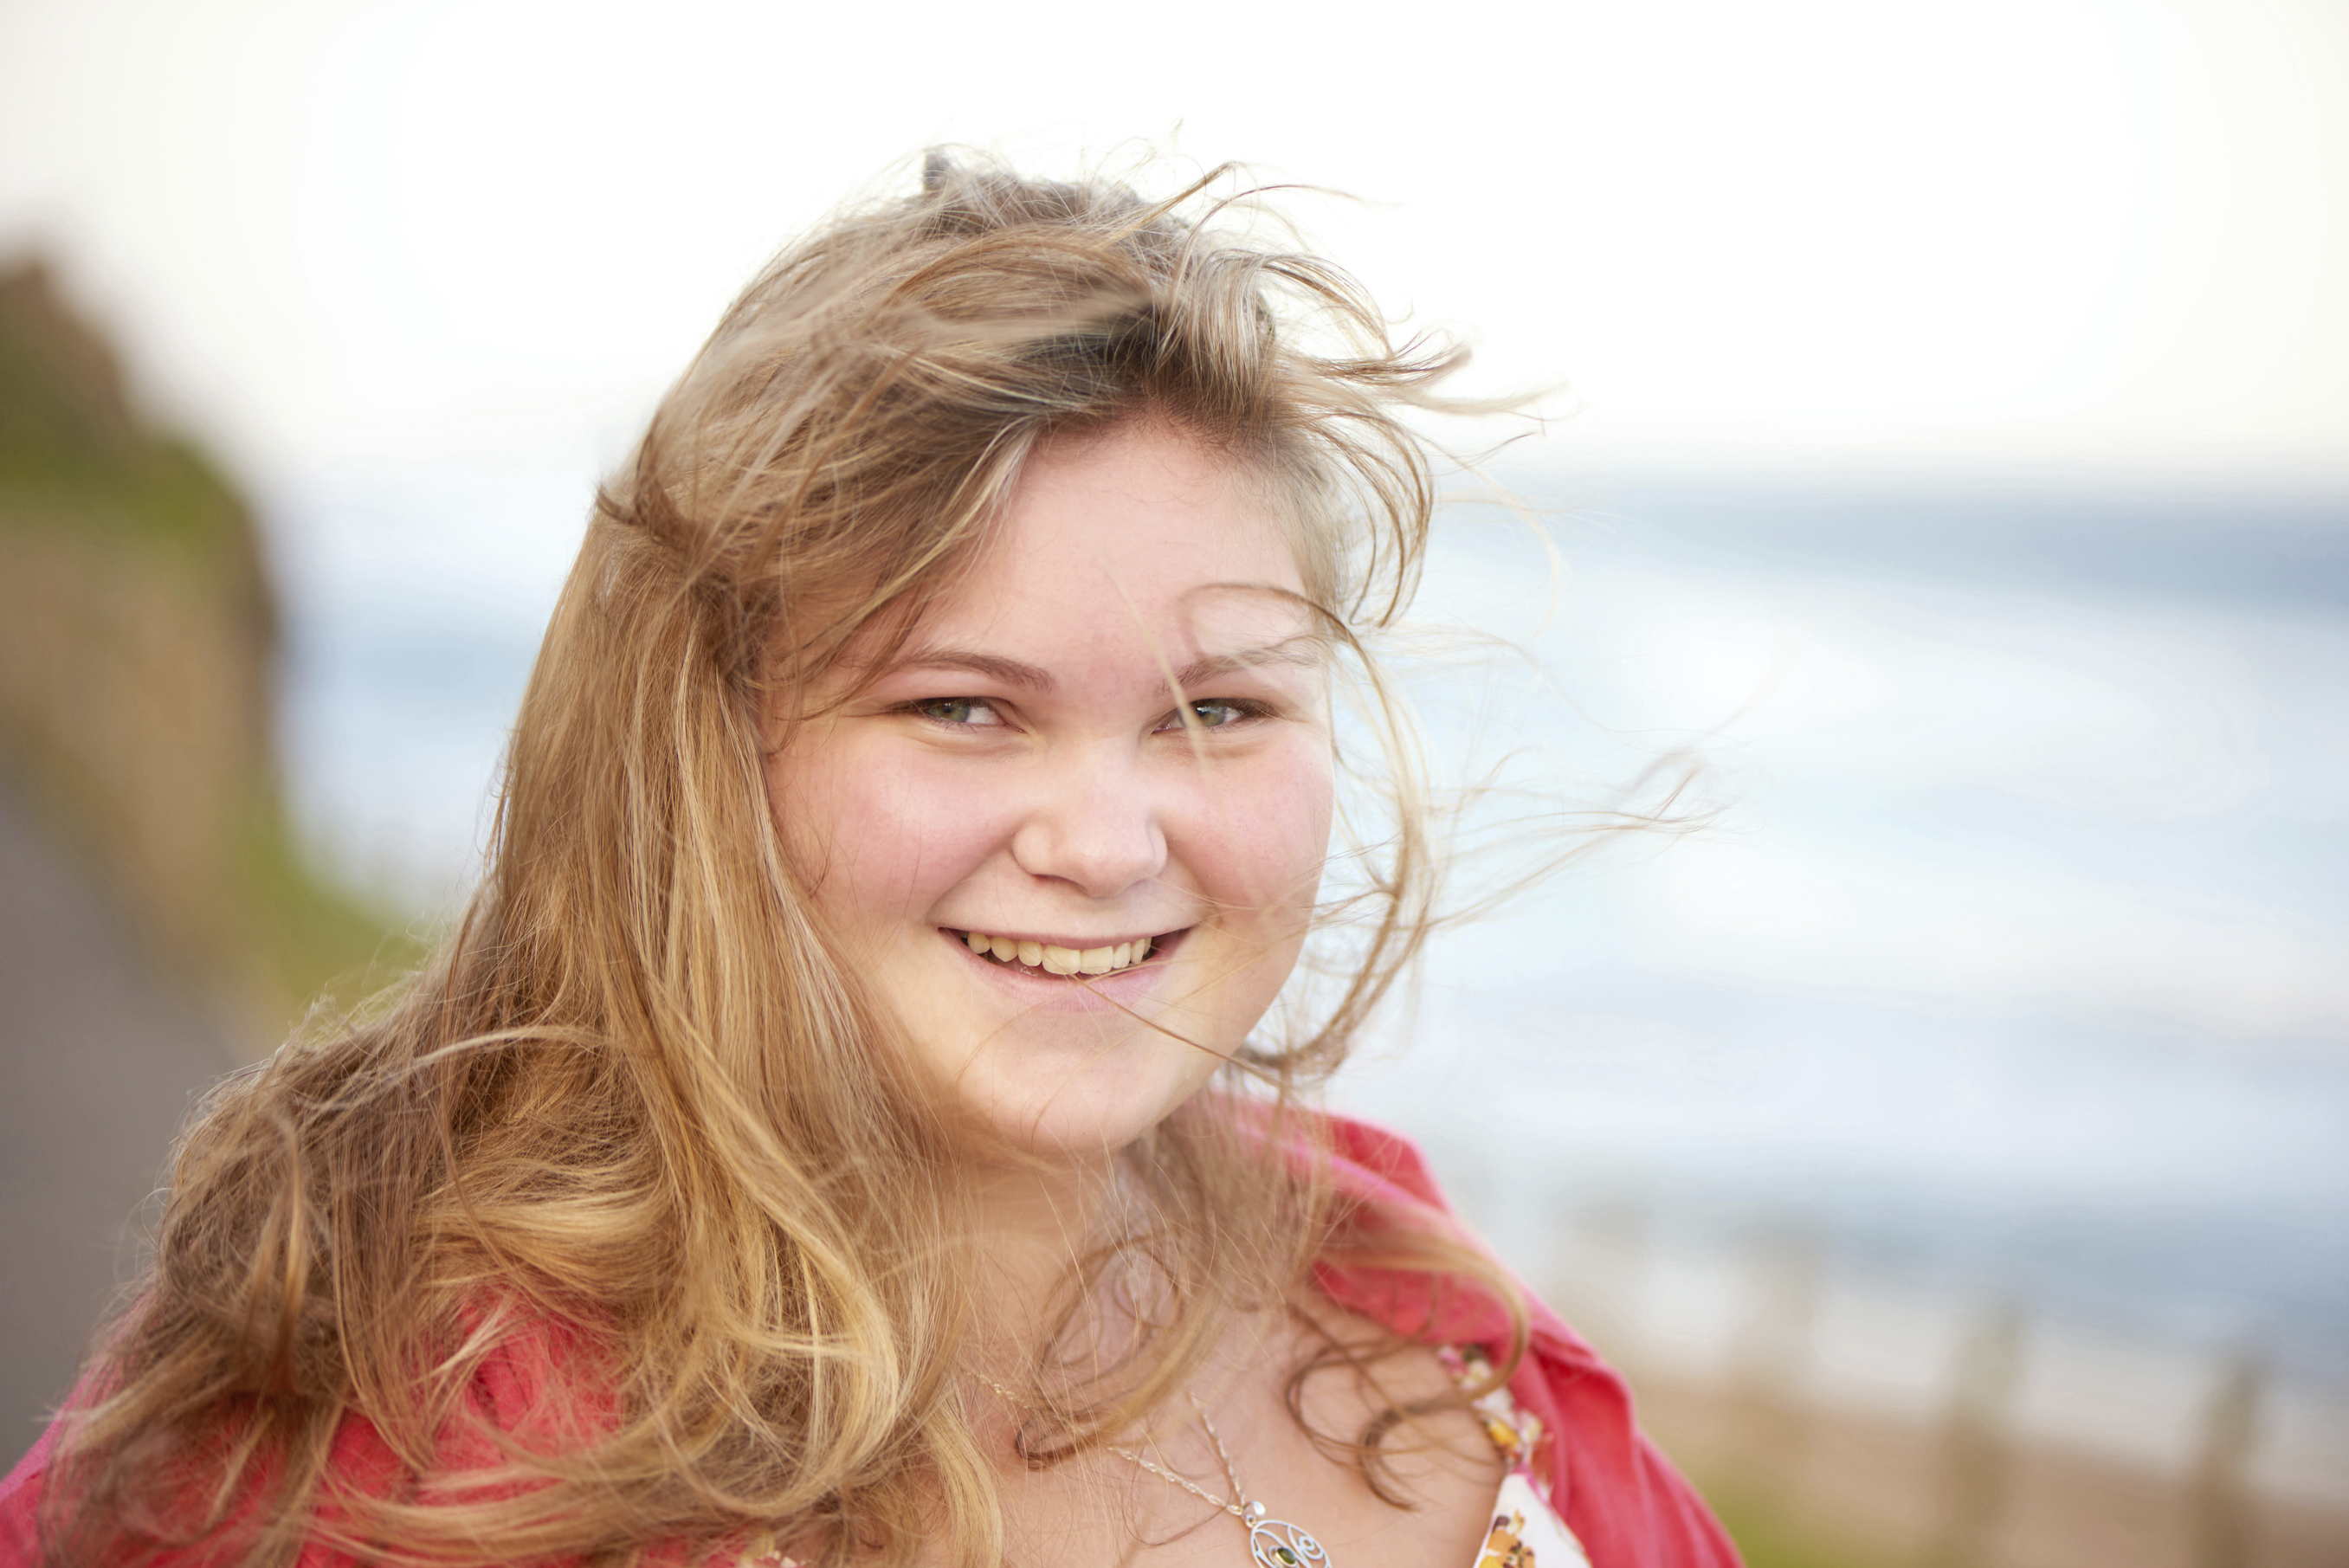 Happy overweight teenager smiling with messy hair